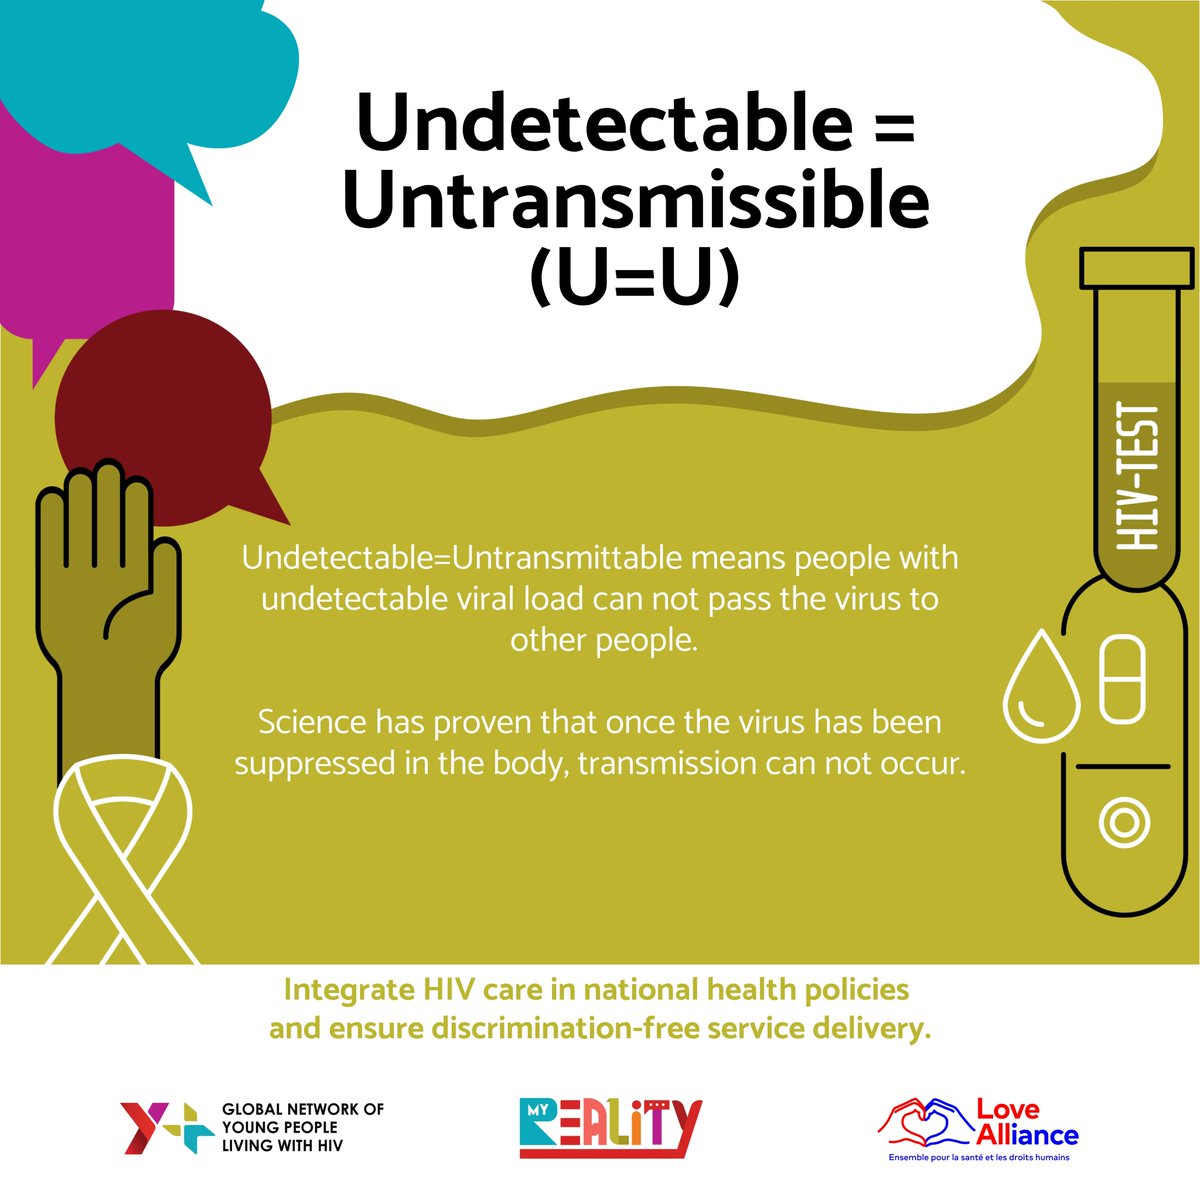 Transforming perceptions. Undetectable = Untransmittable (U=U) is a vital public health message for the HIV response. It means that people living with HIV who achieve an undetectable viral load through consistent antiretroviral treatment and monitoring cannot transmit HIV. By